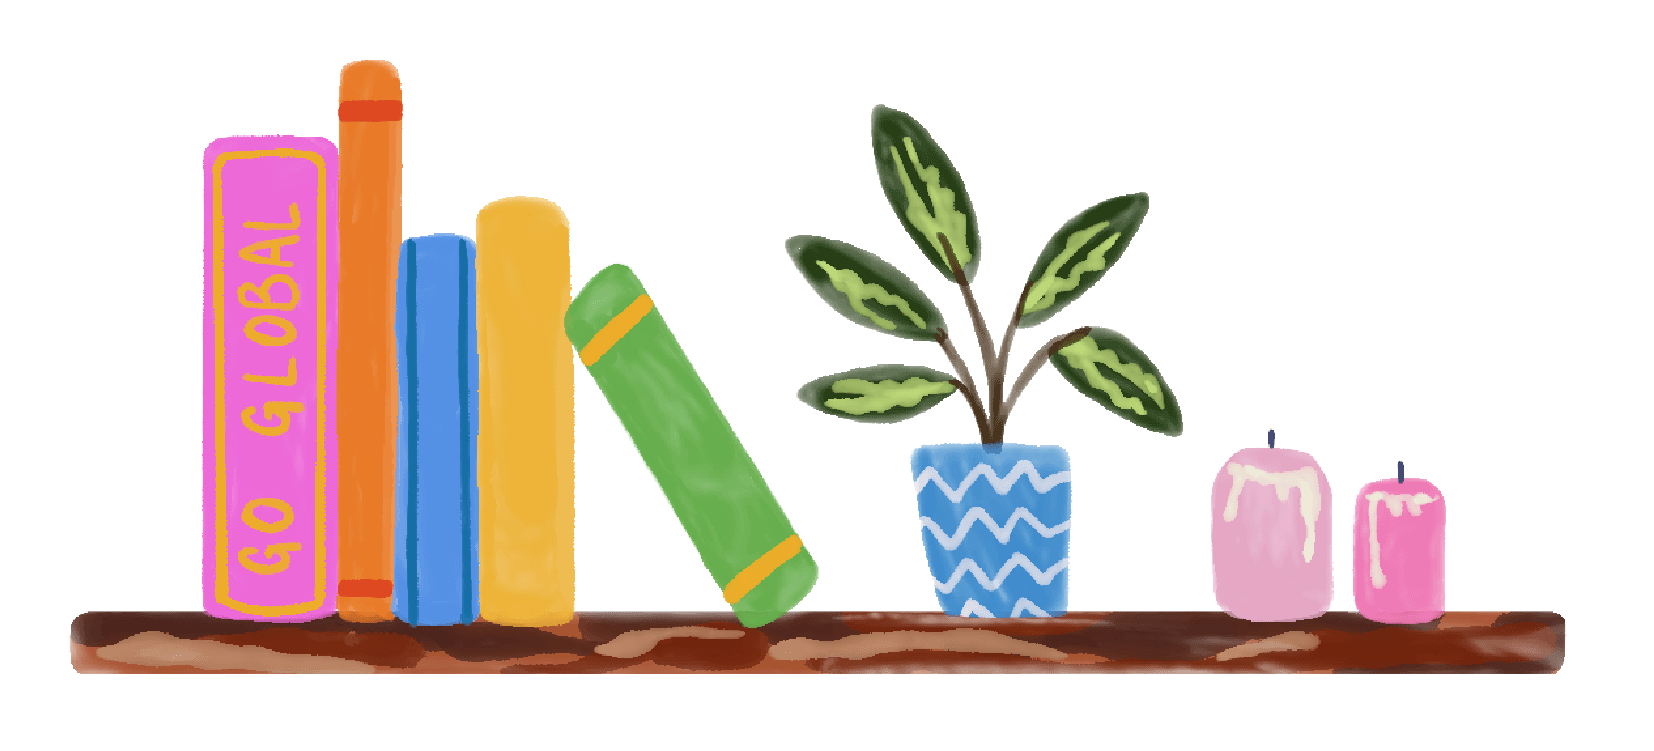 A colourful illustration of books and a houseplant sitting on a shelf